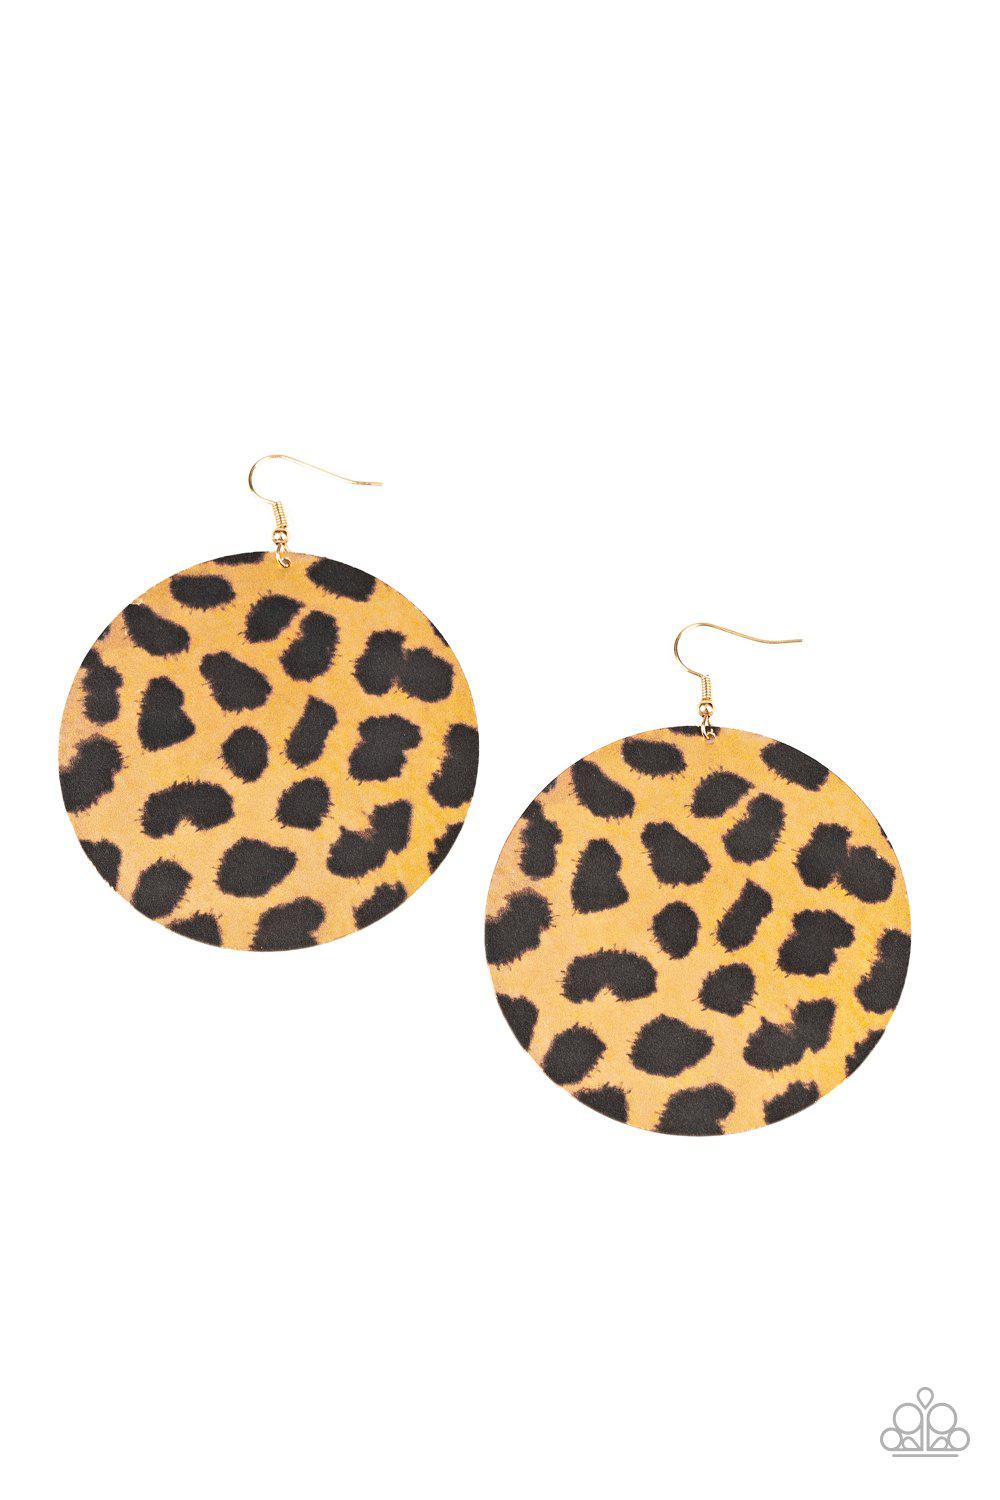 Doing GRR-eat Brown and Gold Animal Print Earrings - Paparazzi Accessories-CarasShop.com - $5 Jewelry by Cara Jewels